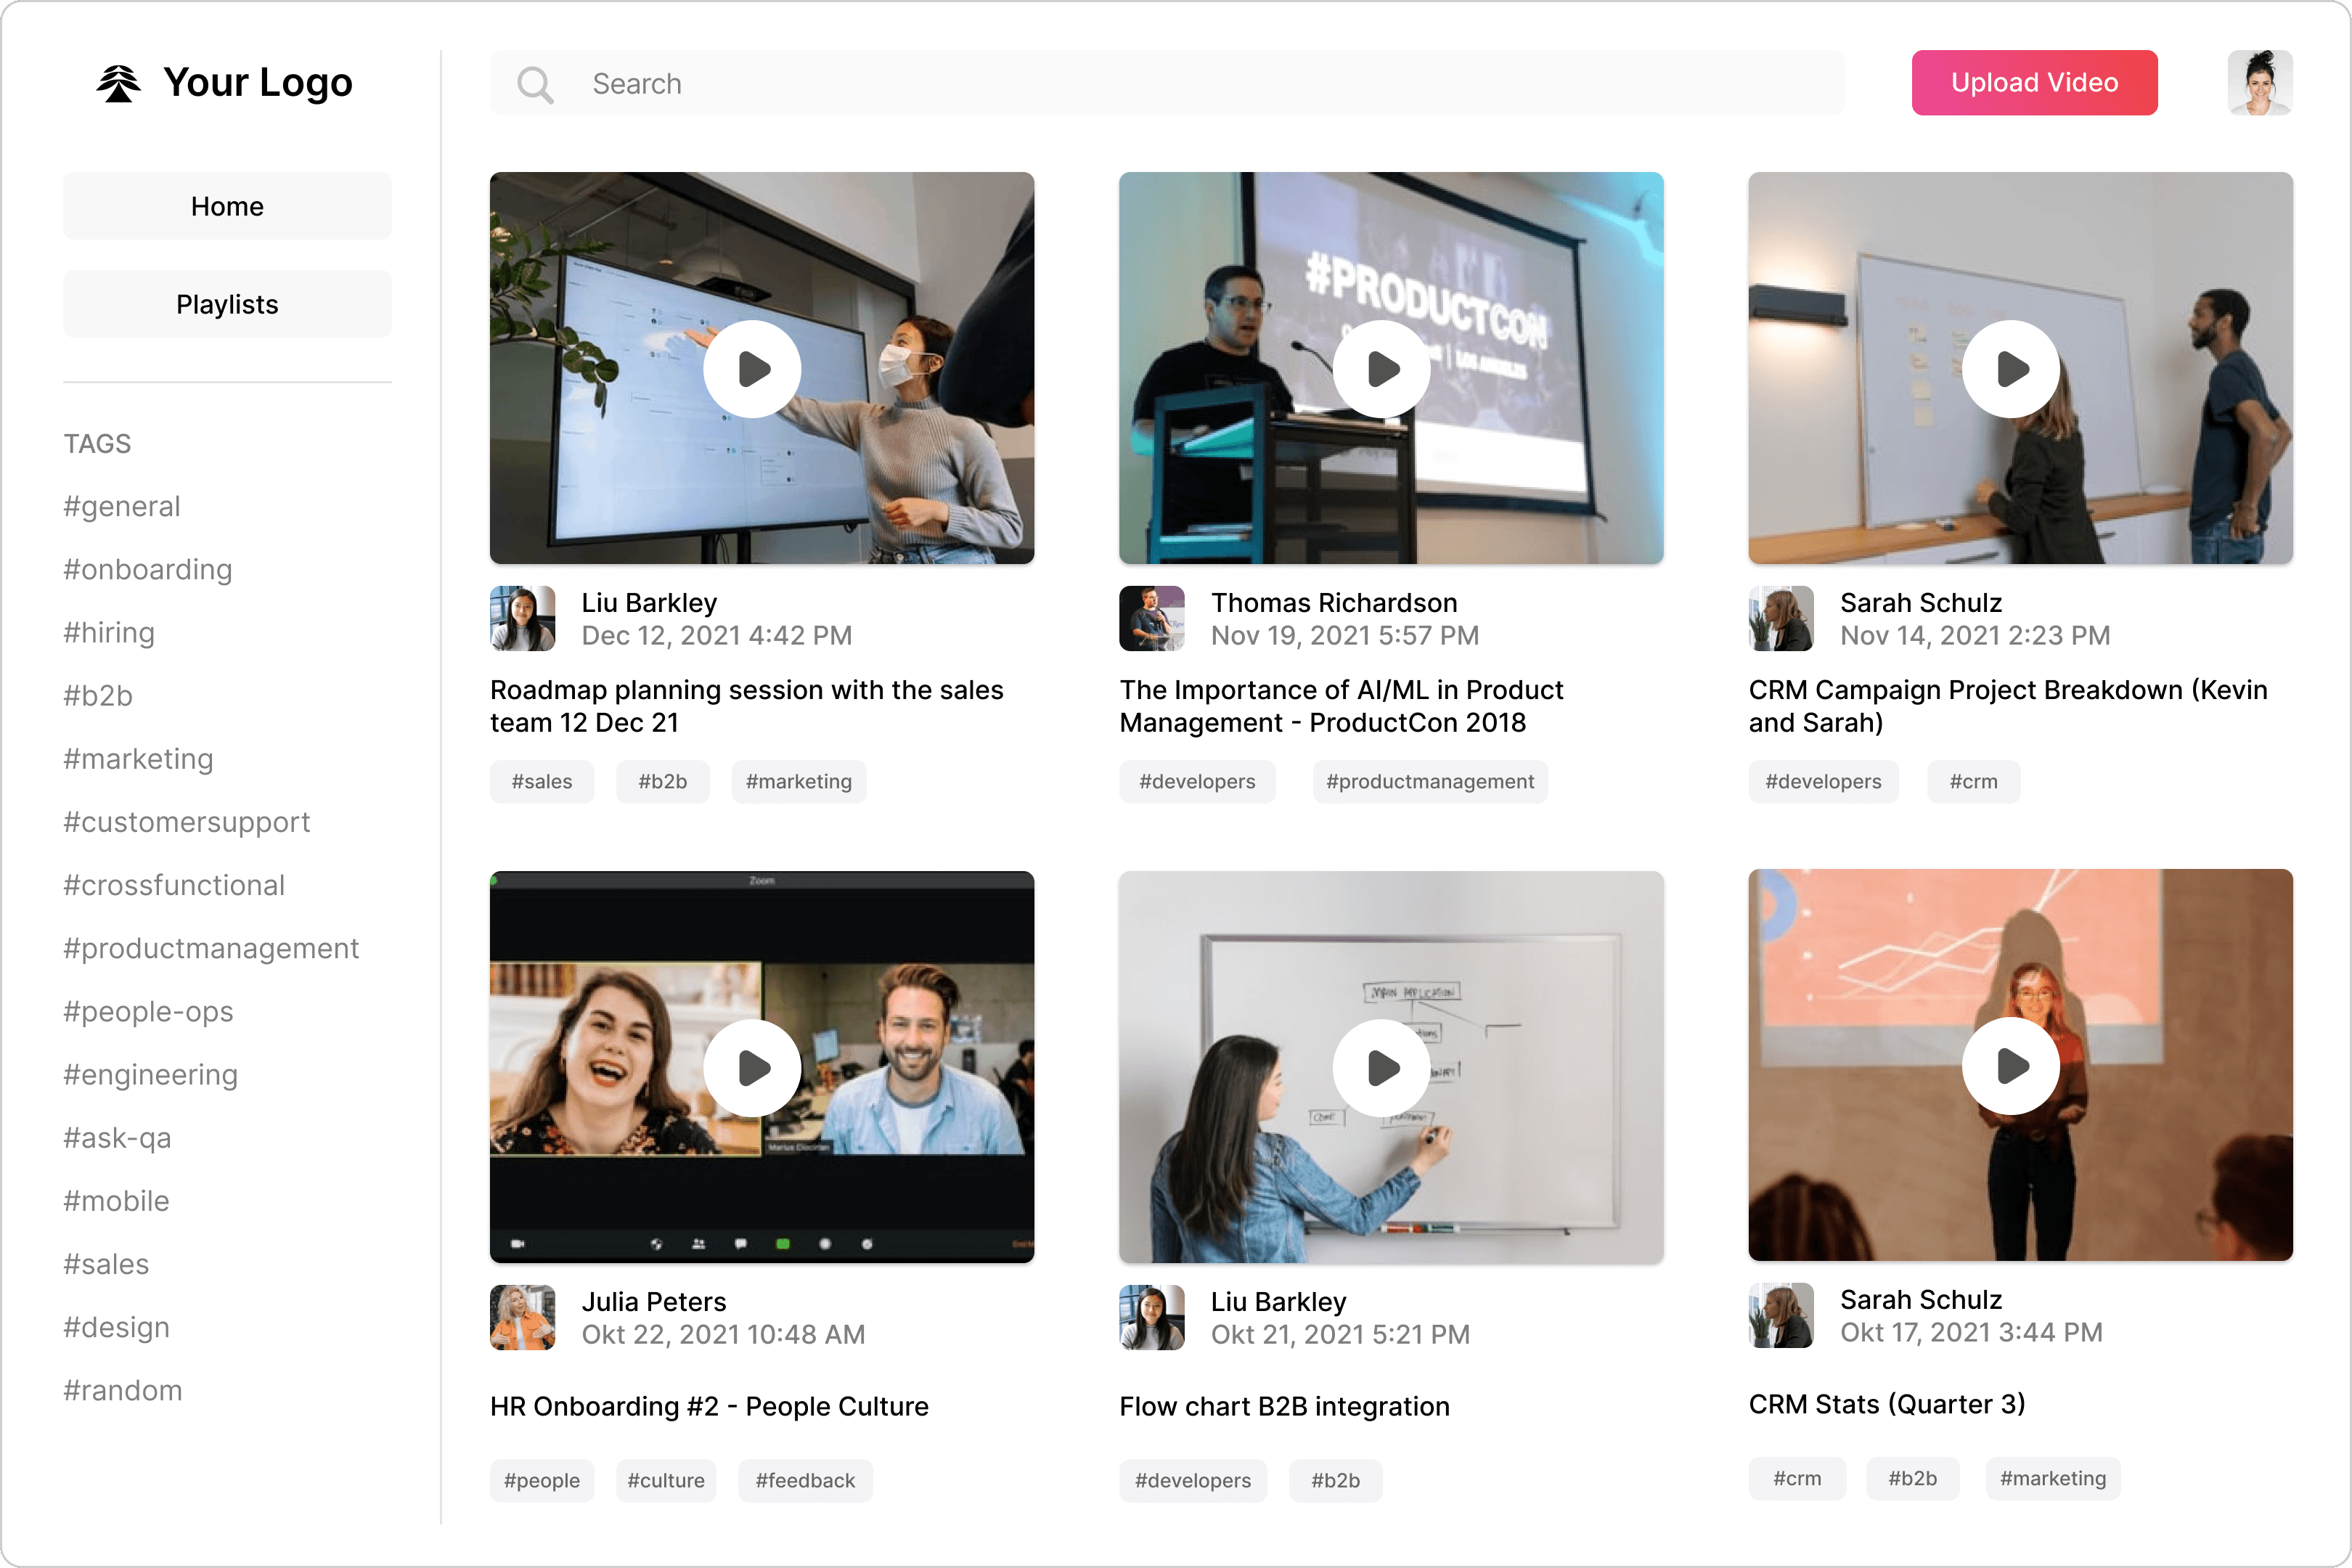 Exploo - Ready to share videos with your team?